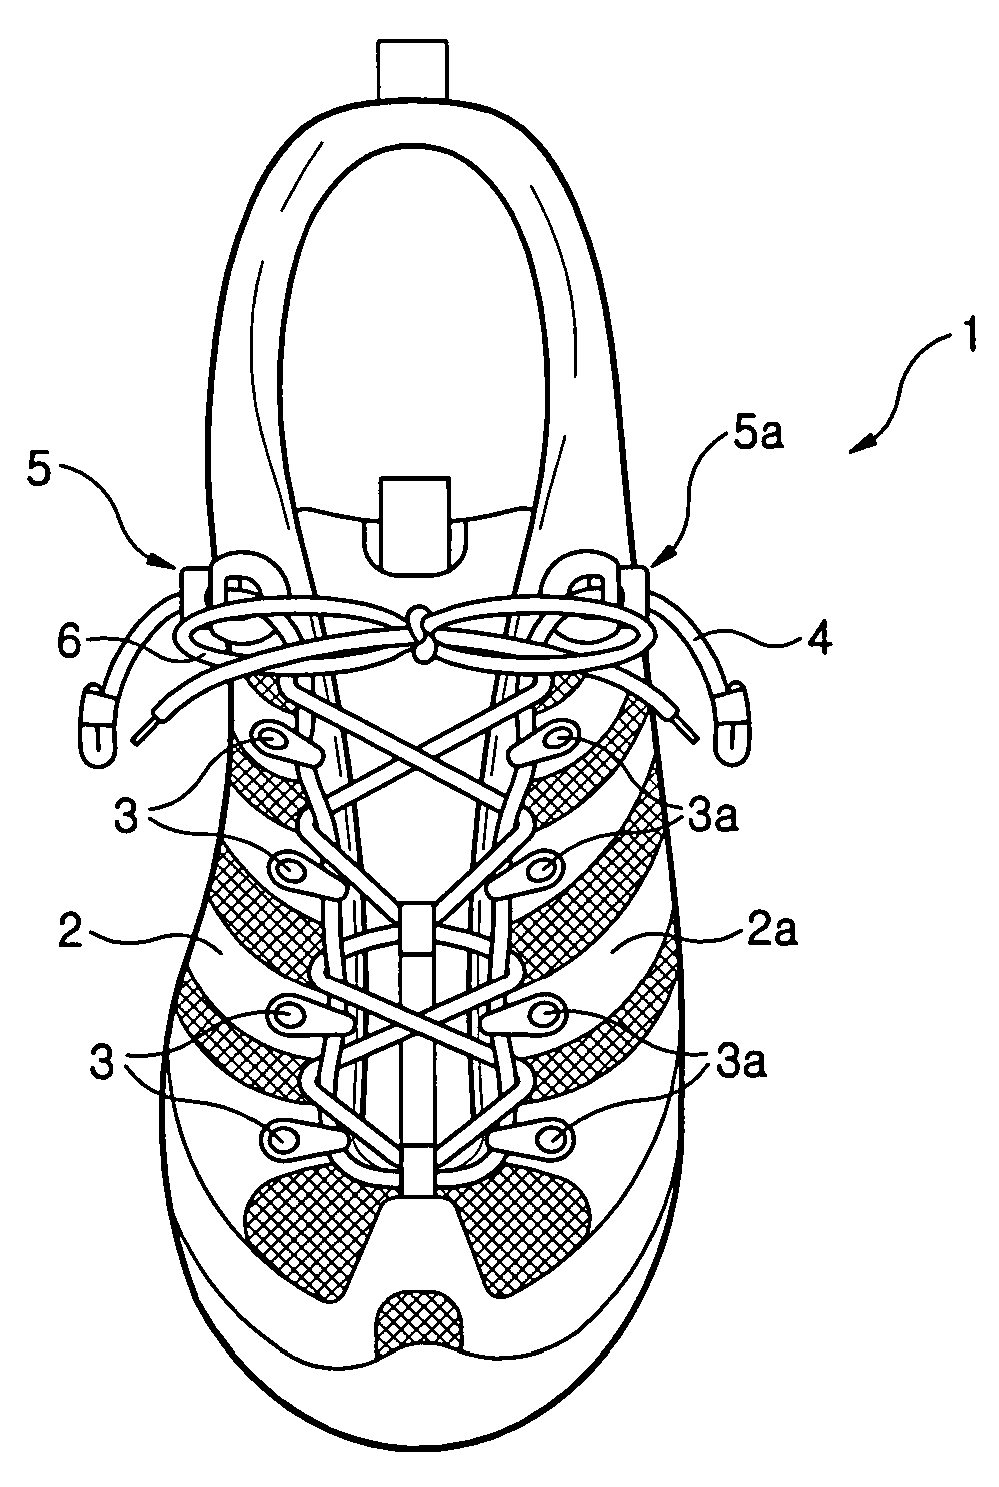 Shoelace tightening structure